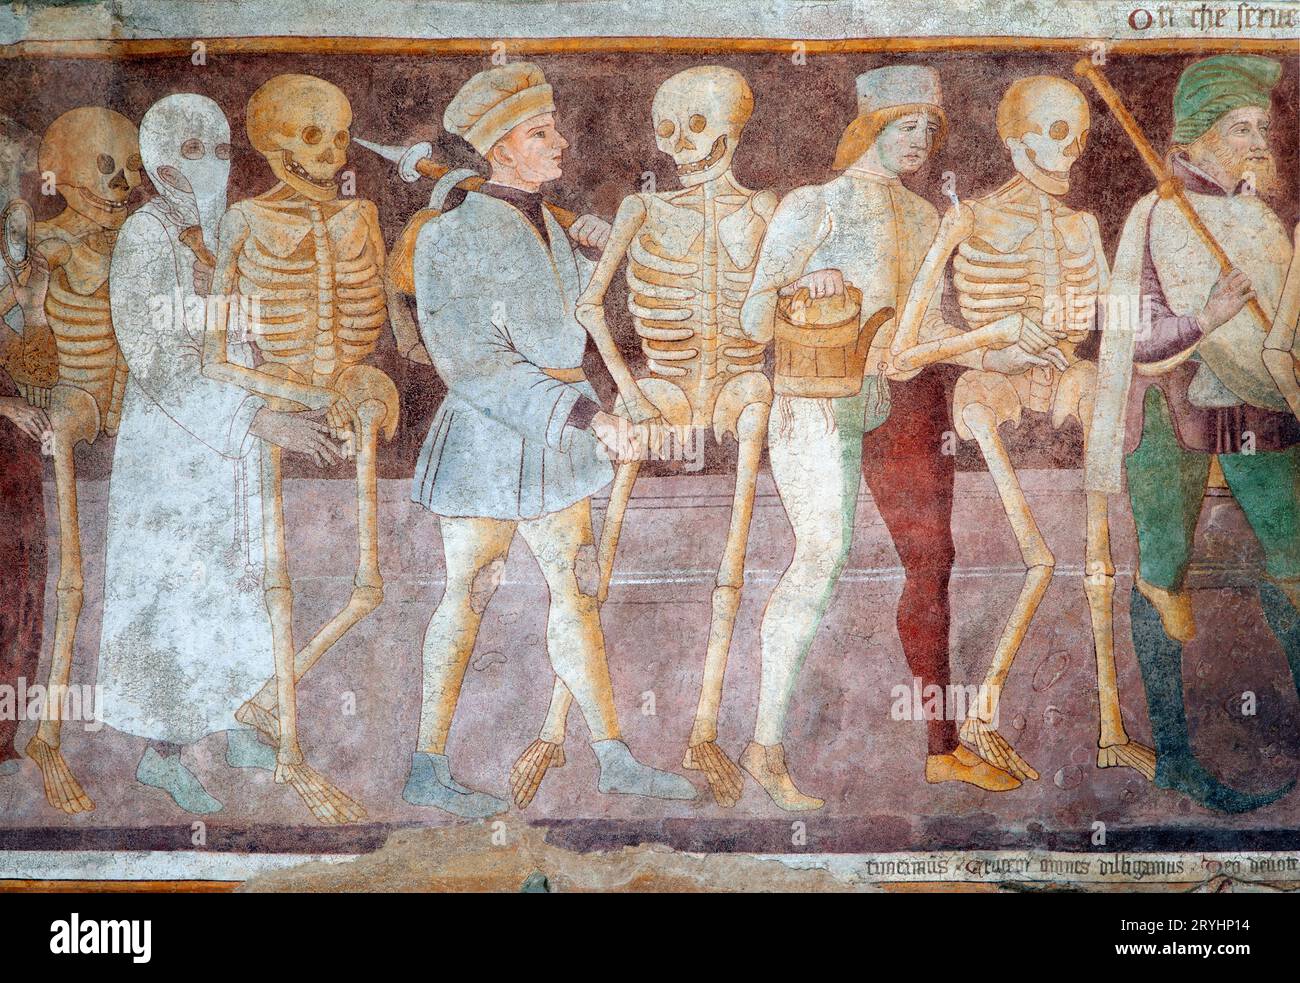 People and skeletons go towards the death, medieval fresco in Clusone, Italy Stock Photo